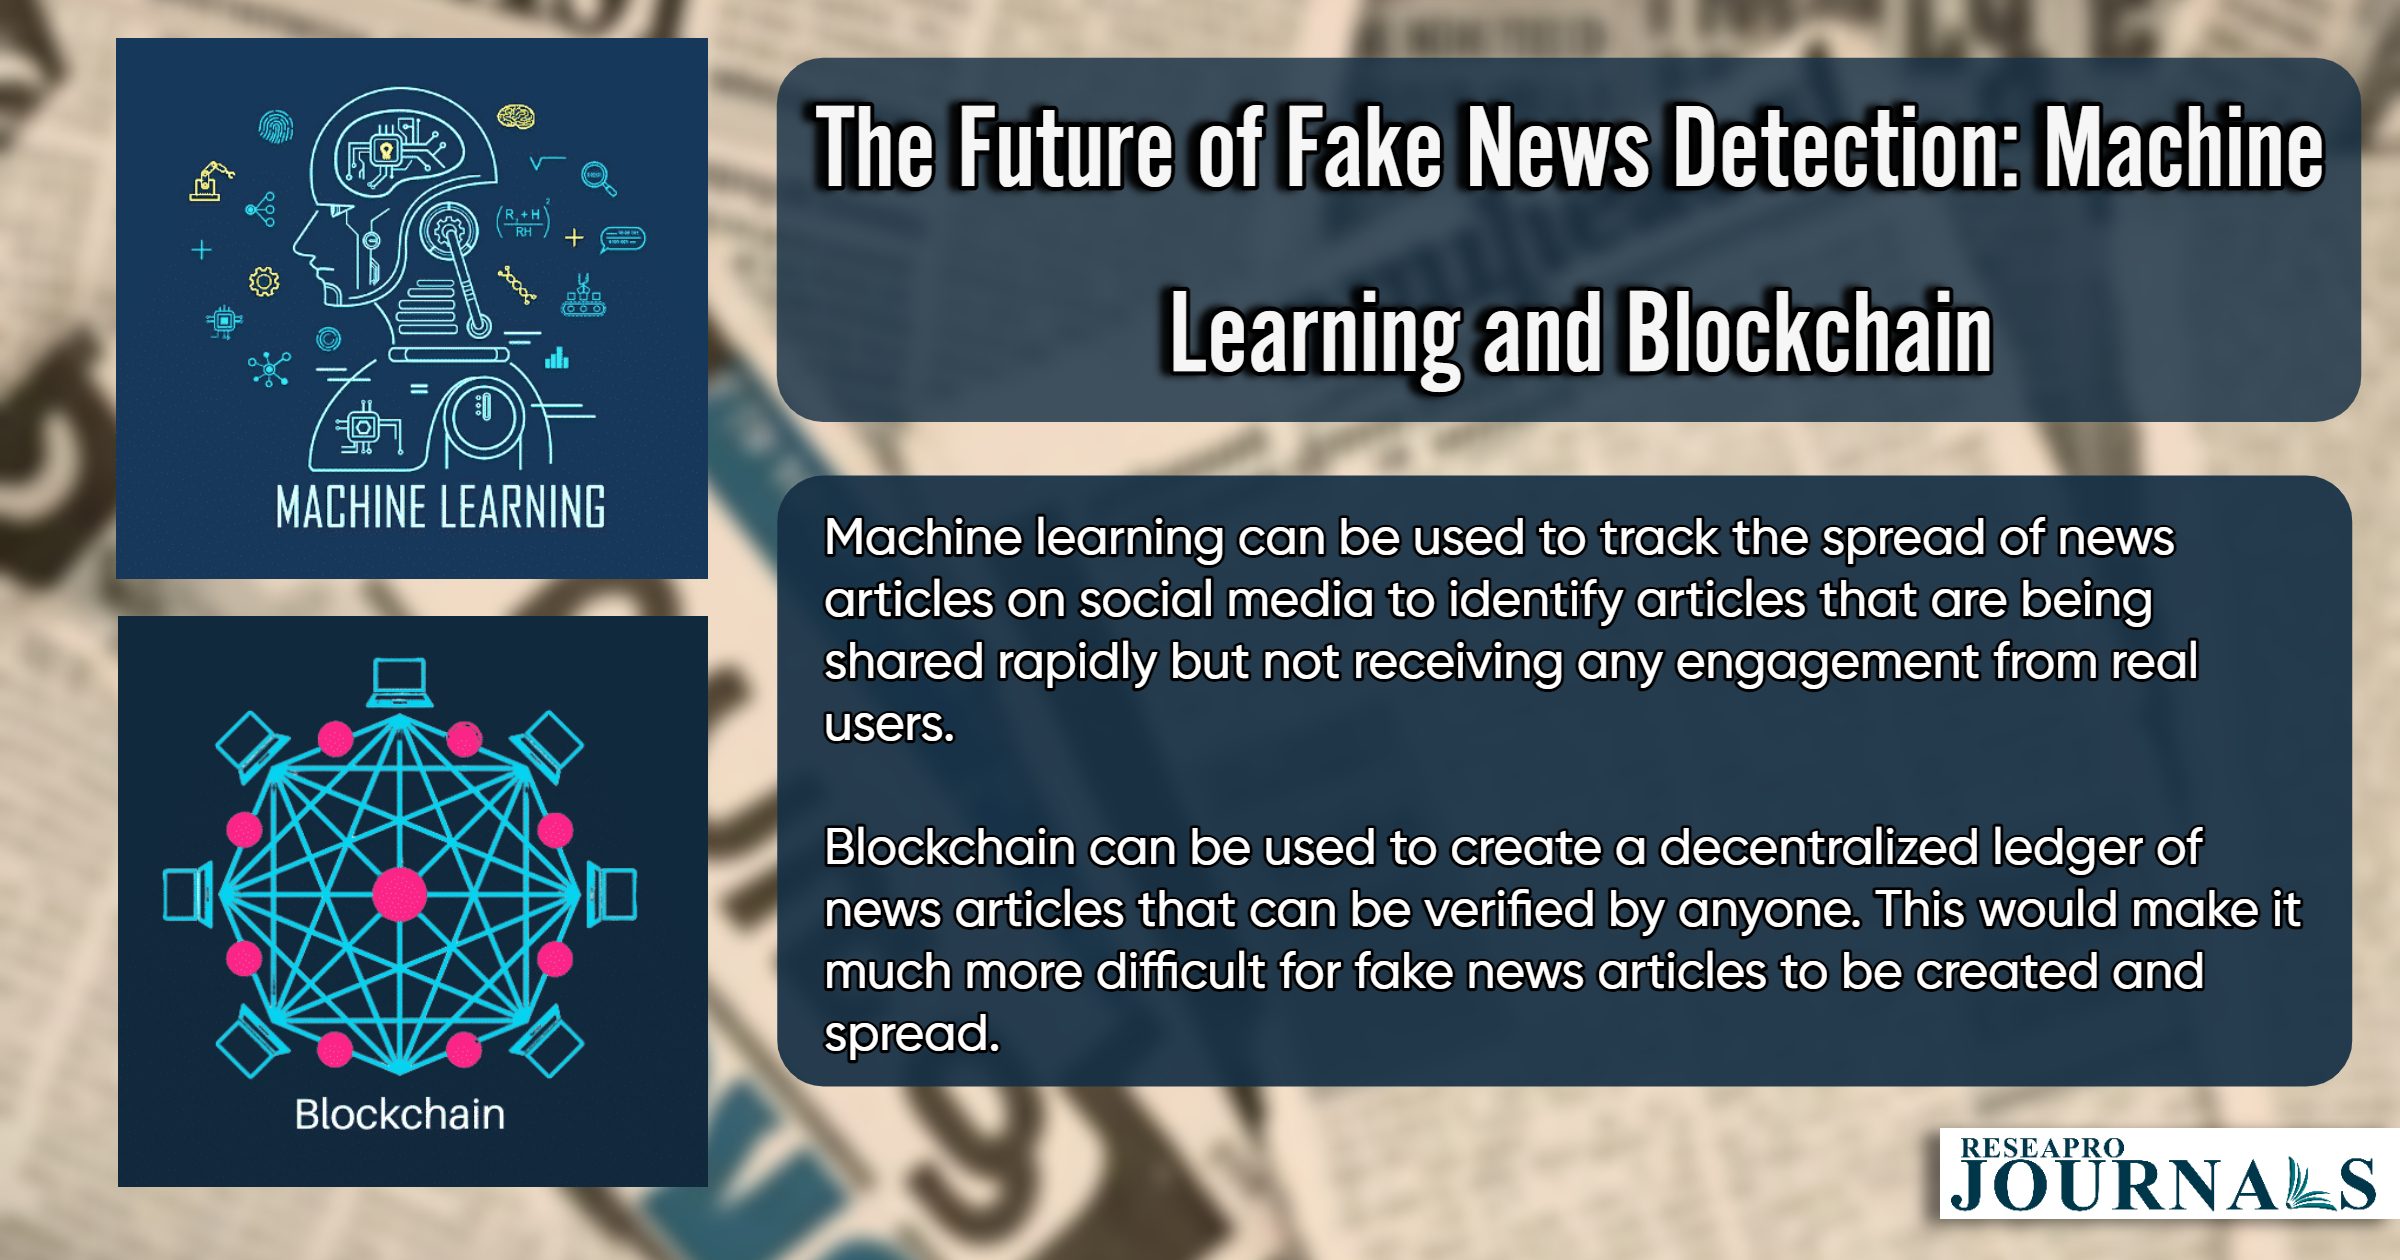 The Future of Fake News Detection: Machine Learning and Blockchain